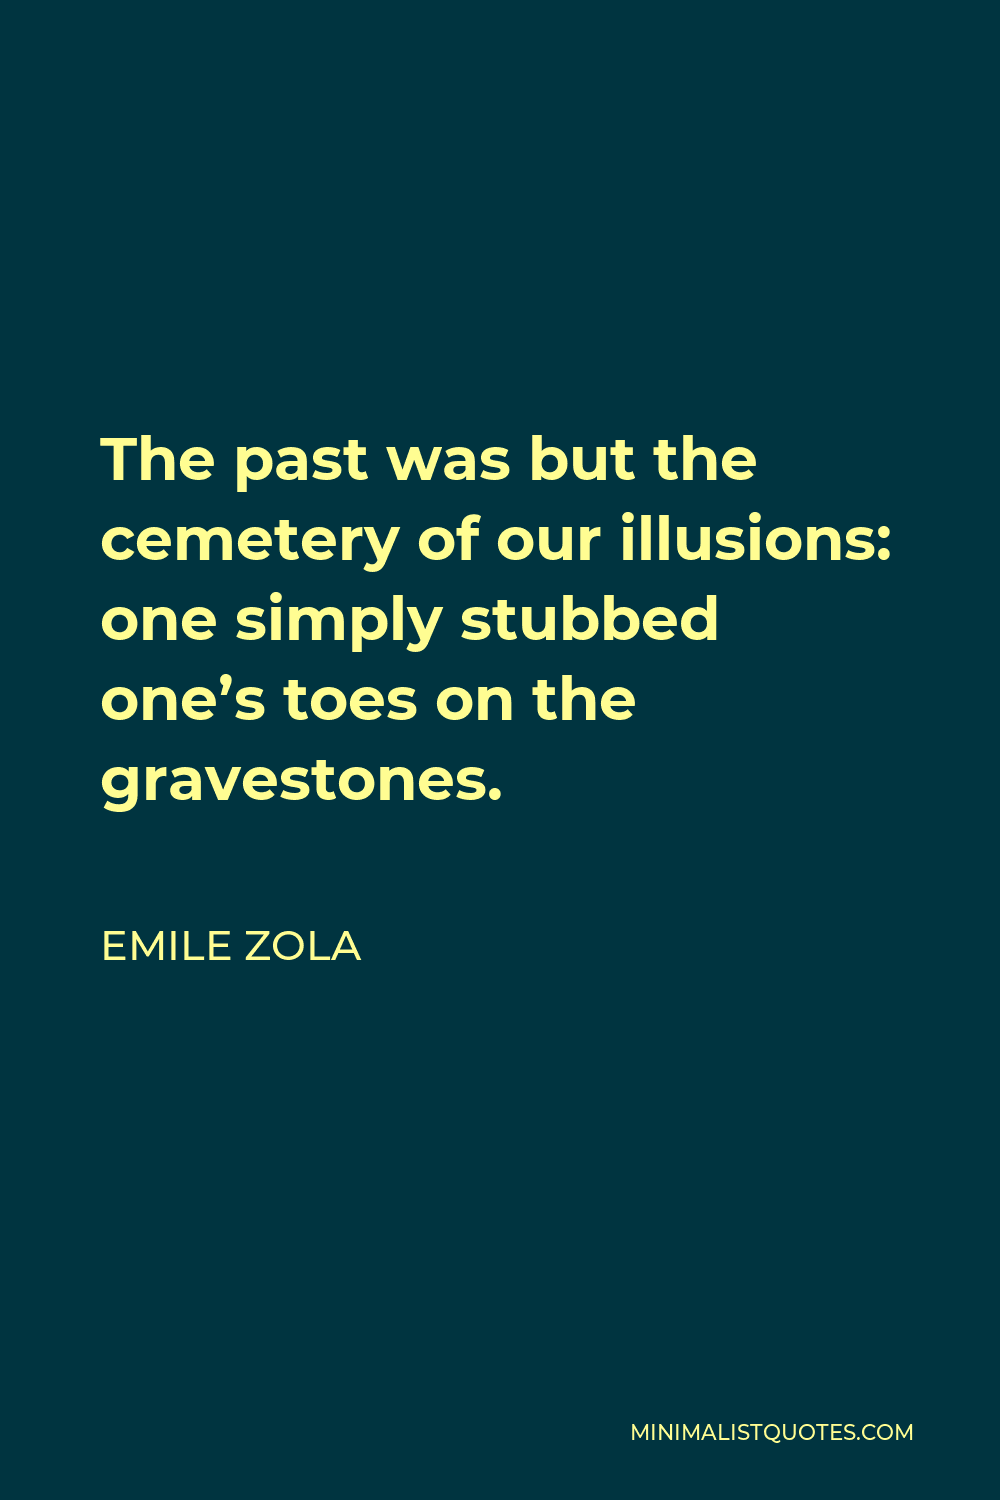 Emile Zola Quote - The past was but the cemetery of our illusions: one simply stubbed one’s toes on the gravestones.